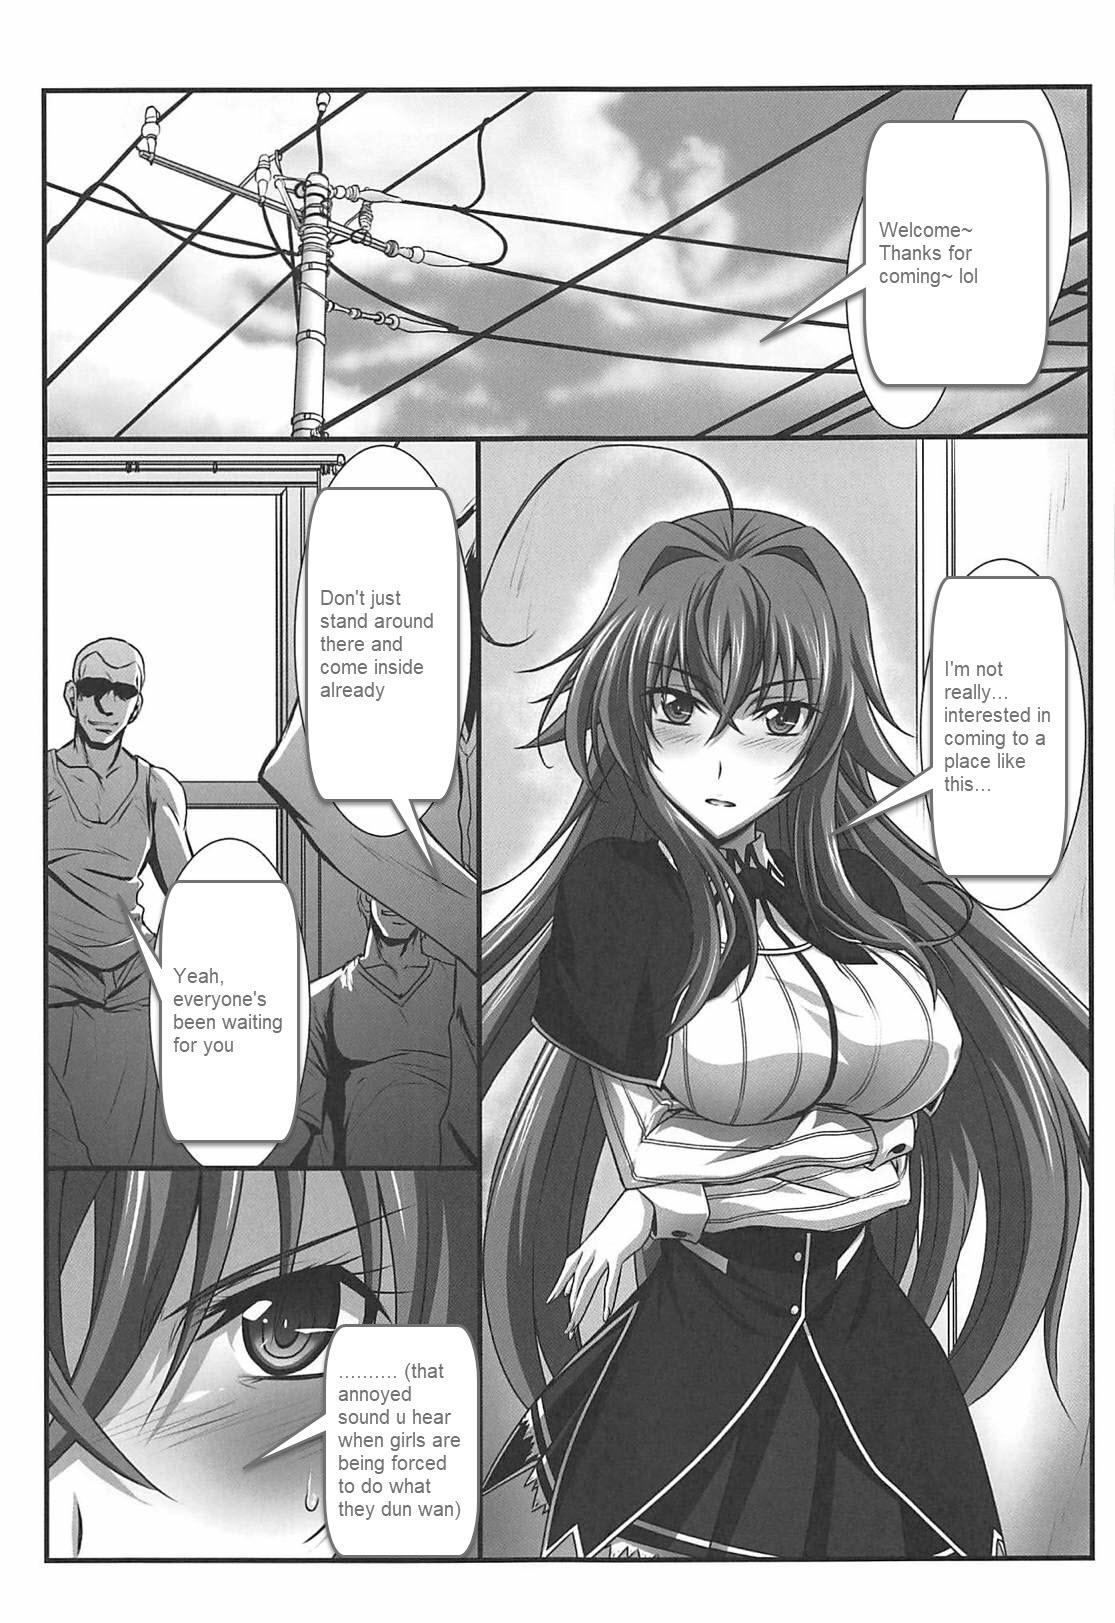 Dance SPIRAL ZONE DxD II - Highschool dxd Vintage - Page 4